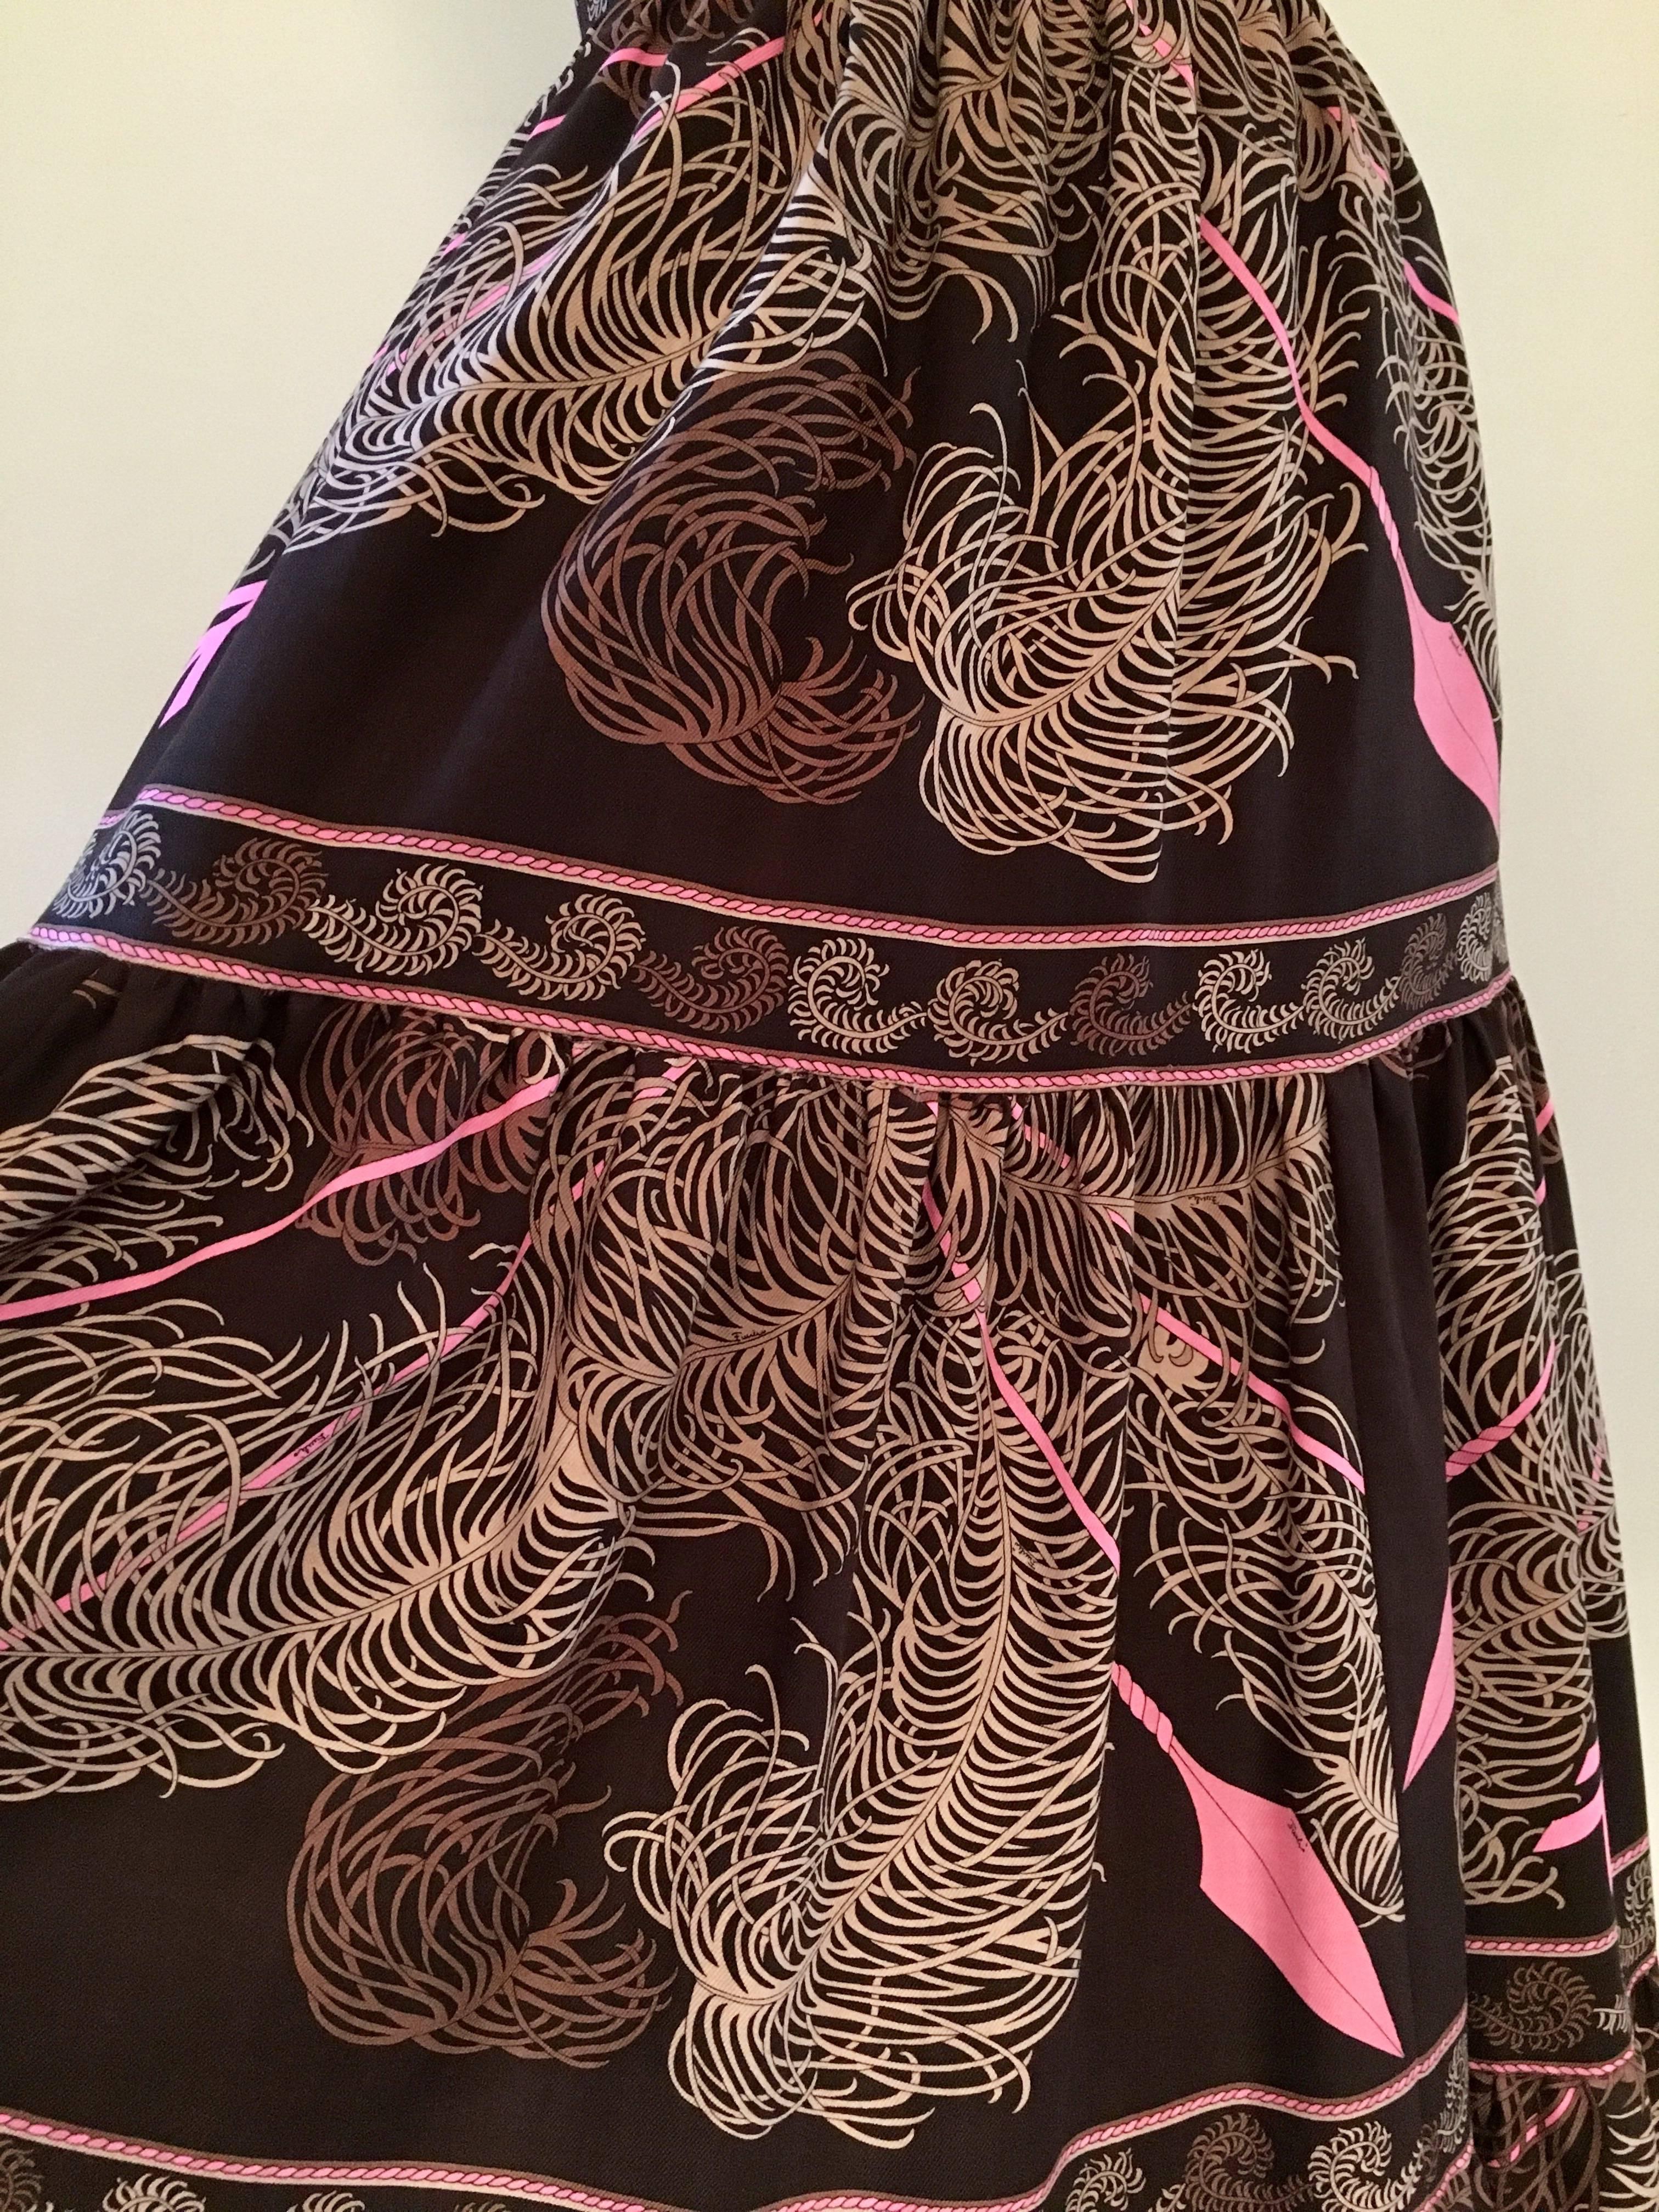 This is a fabulous skirt made in 1977 by Emilio Pucci. It is made out of Pucci's 'Struzzo' or 'Ostrich' print and features ostrich feathers and arrows. The fabric is a wool challis and the skirt is fully lined and made up of three tiers. It zips at